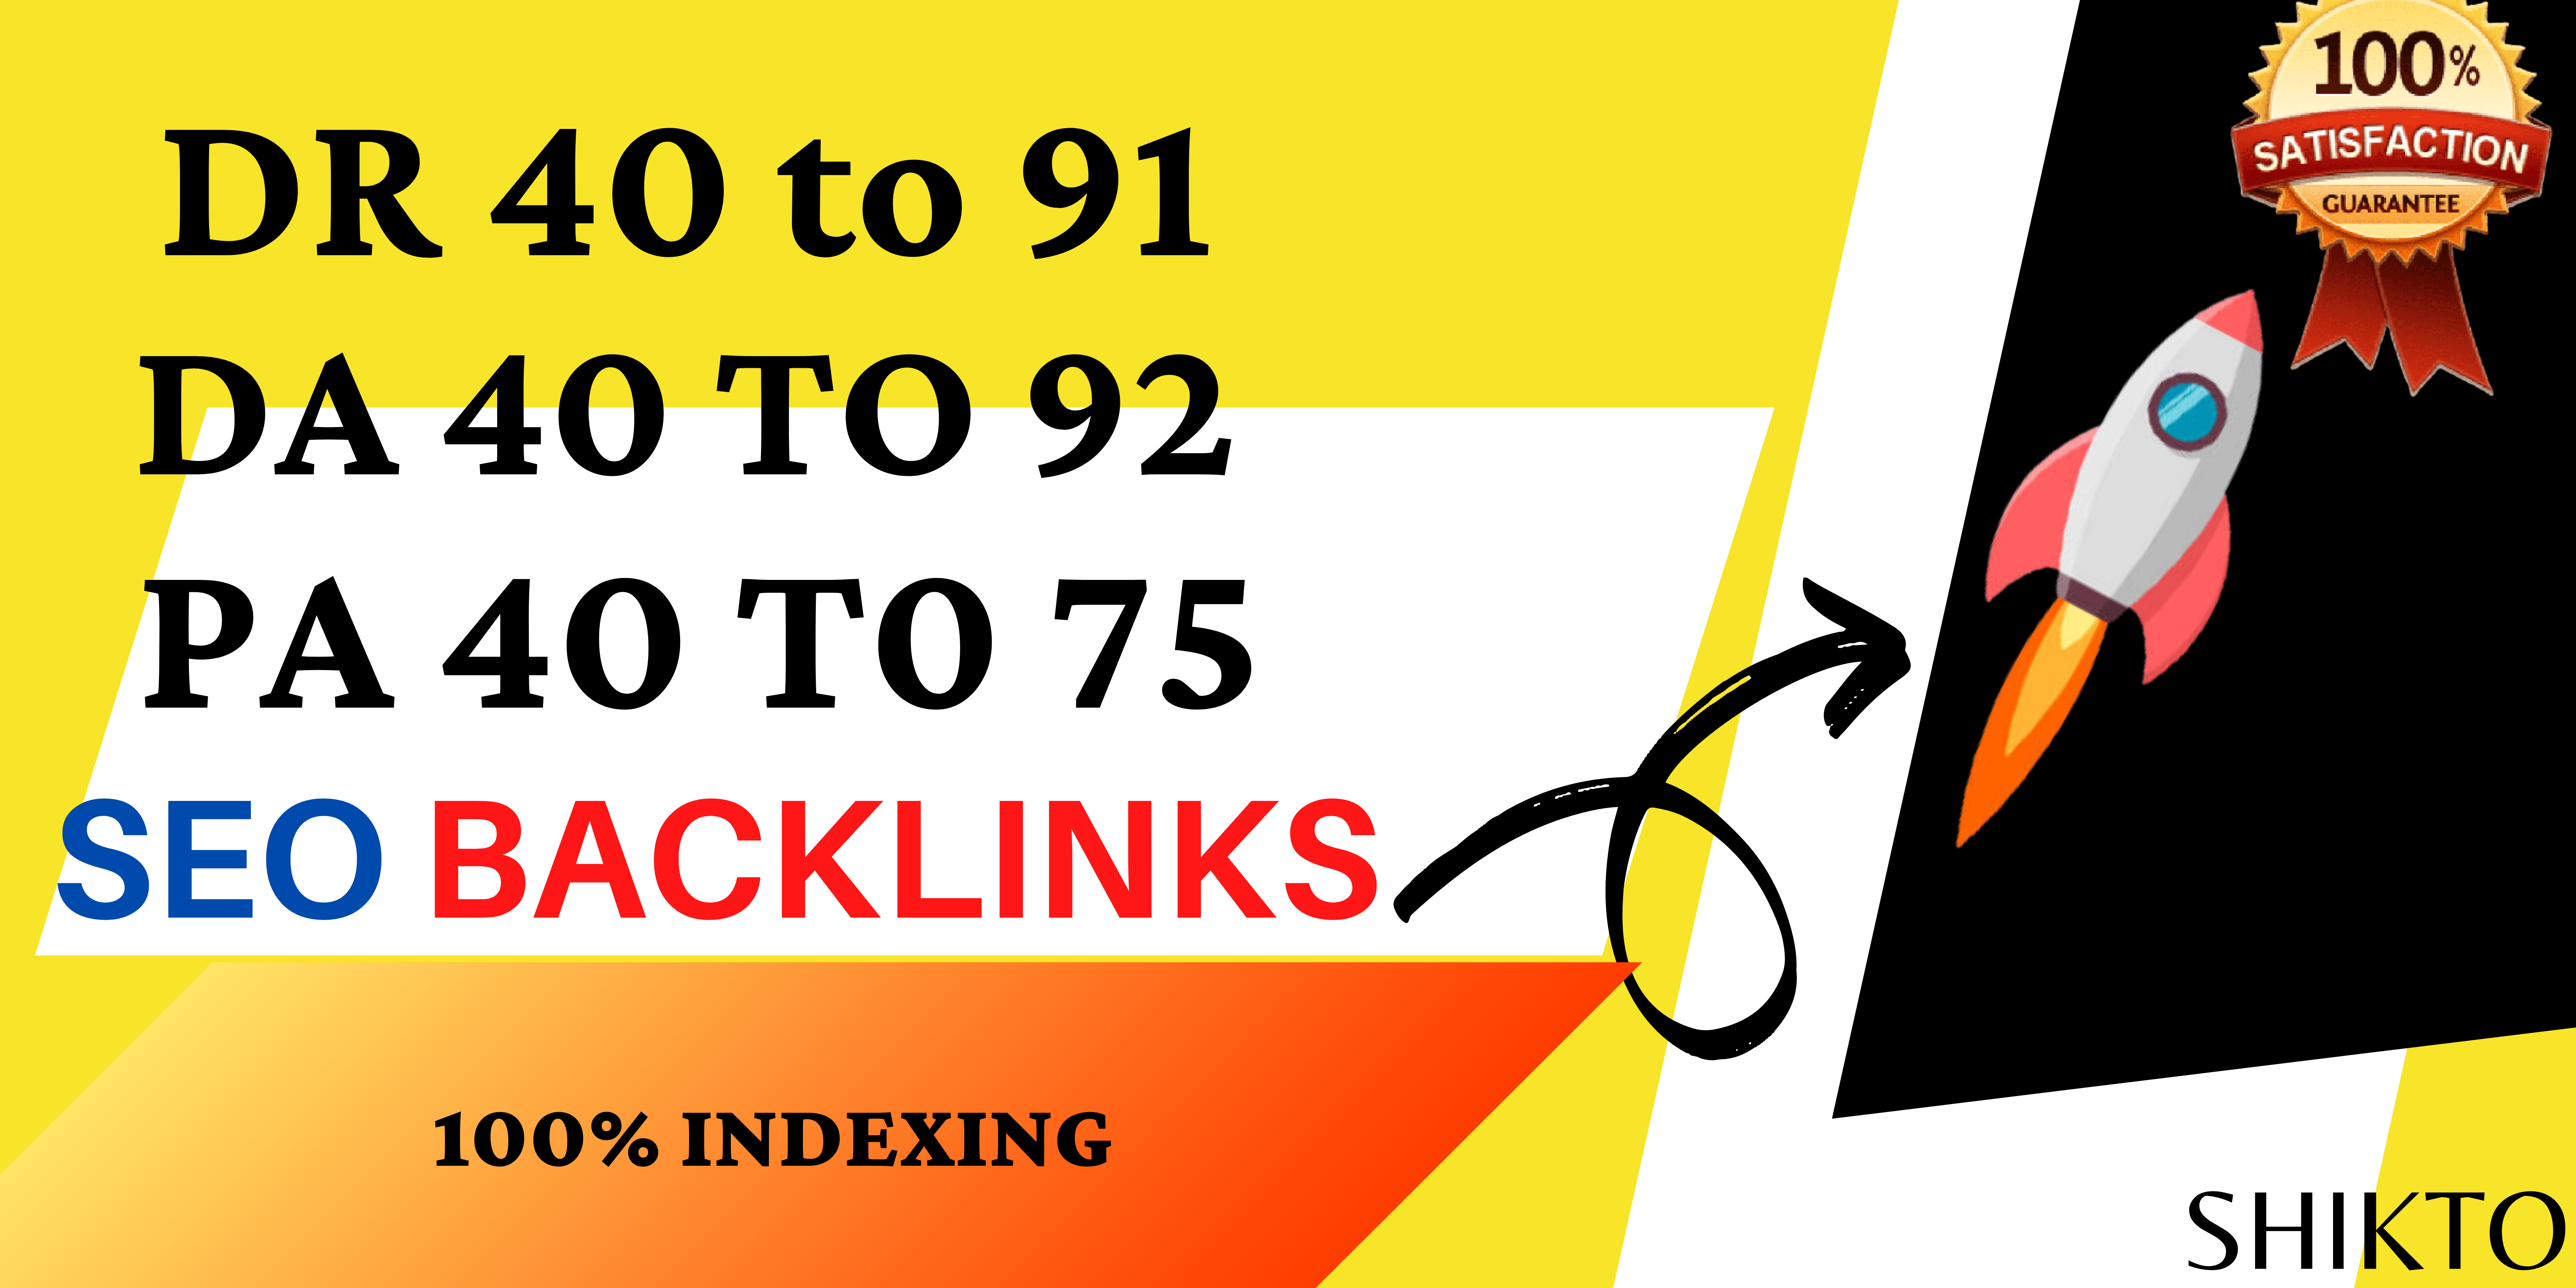 I will provide 10 backlinks DR 40 to 91 dofollow backlinks for off page seo